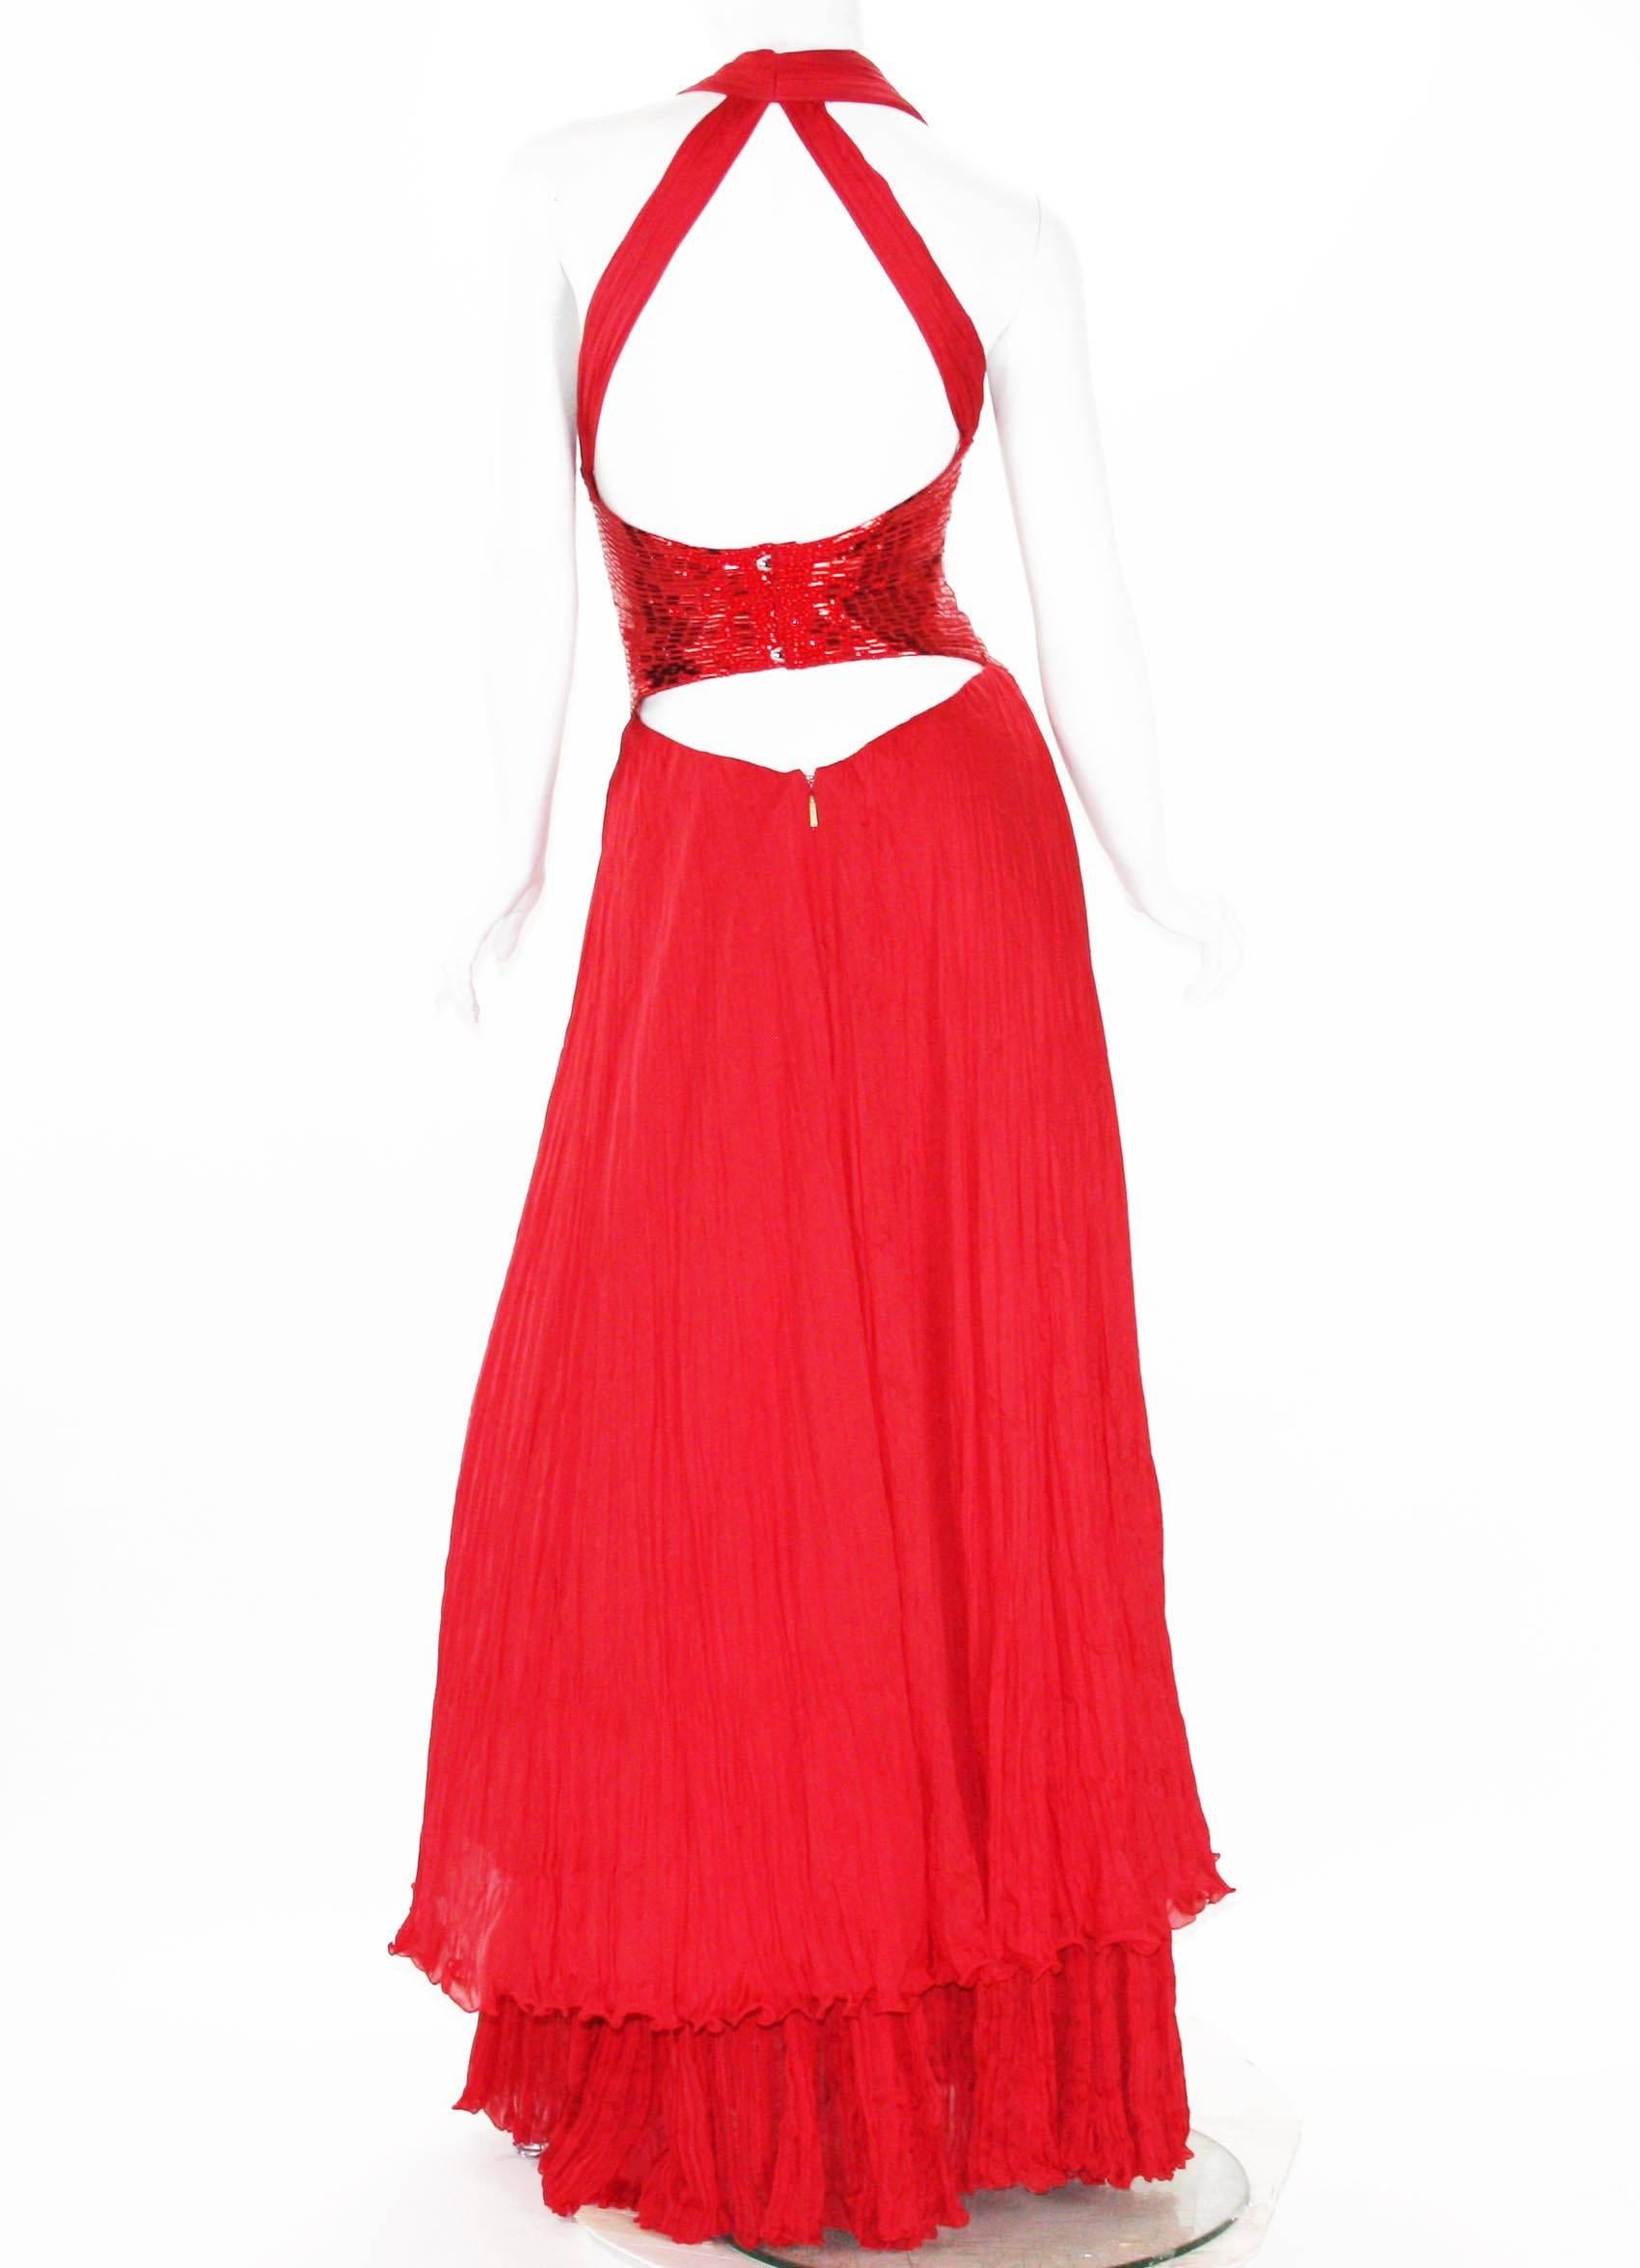 roberto cavalli spring 2005 red one-shoulder backless gown